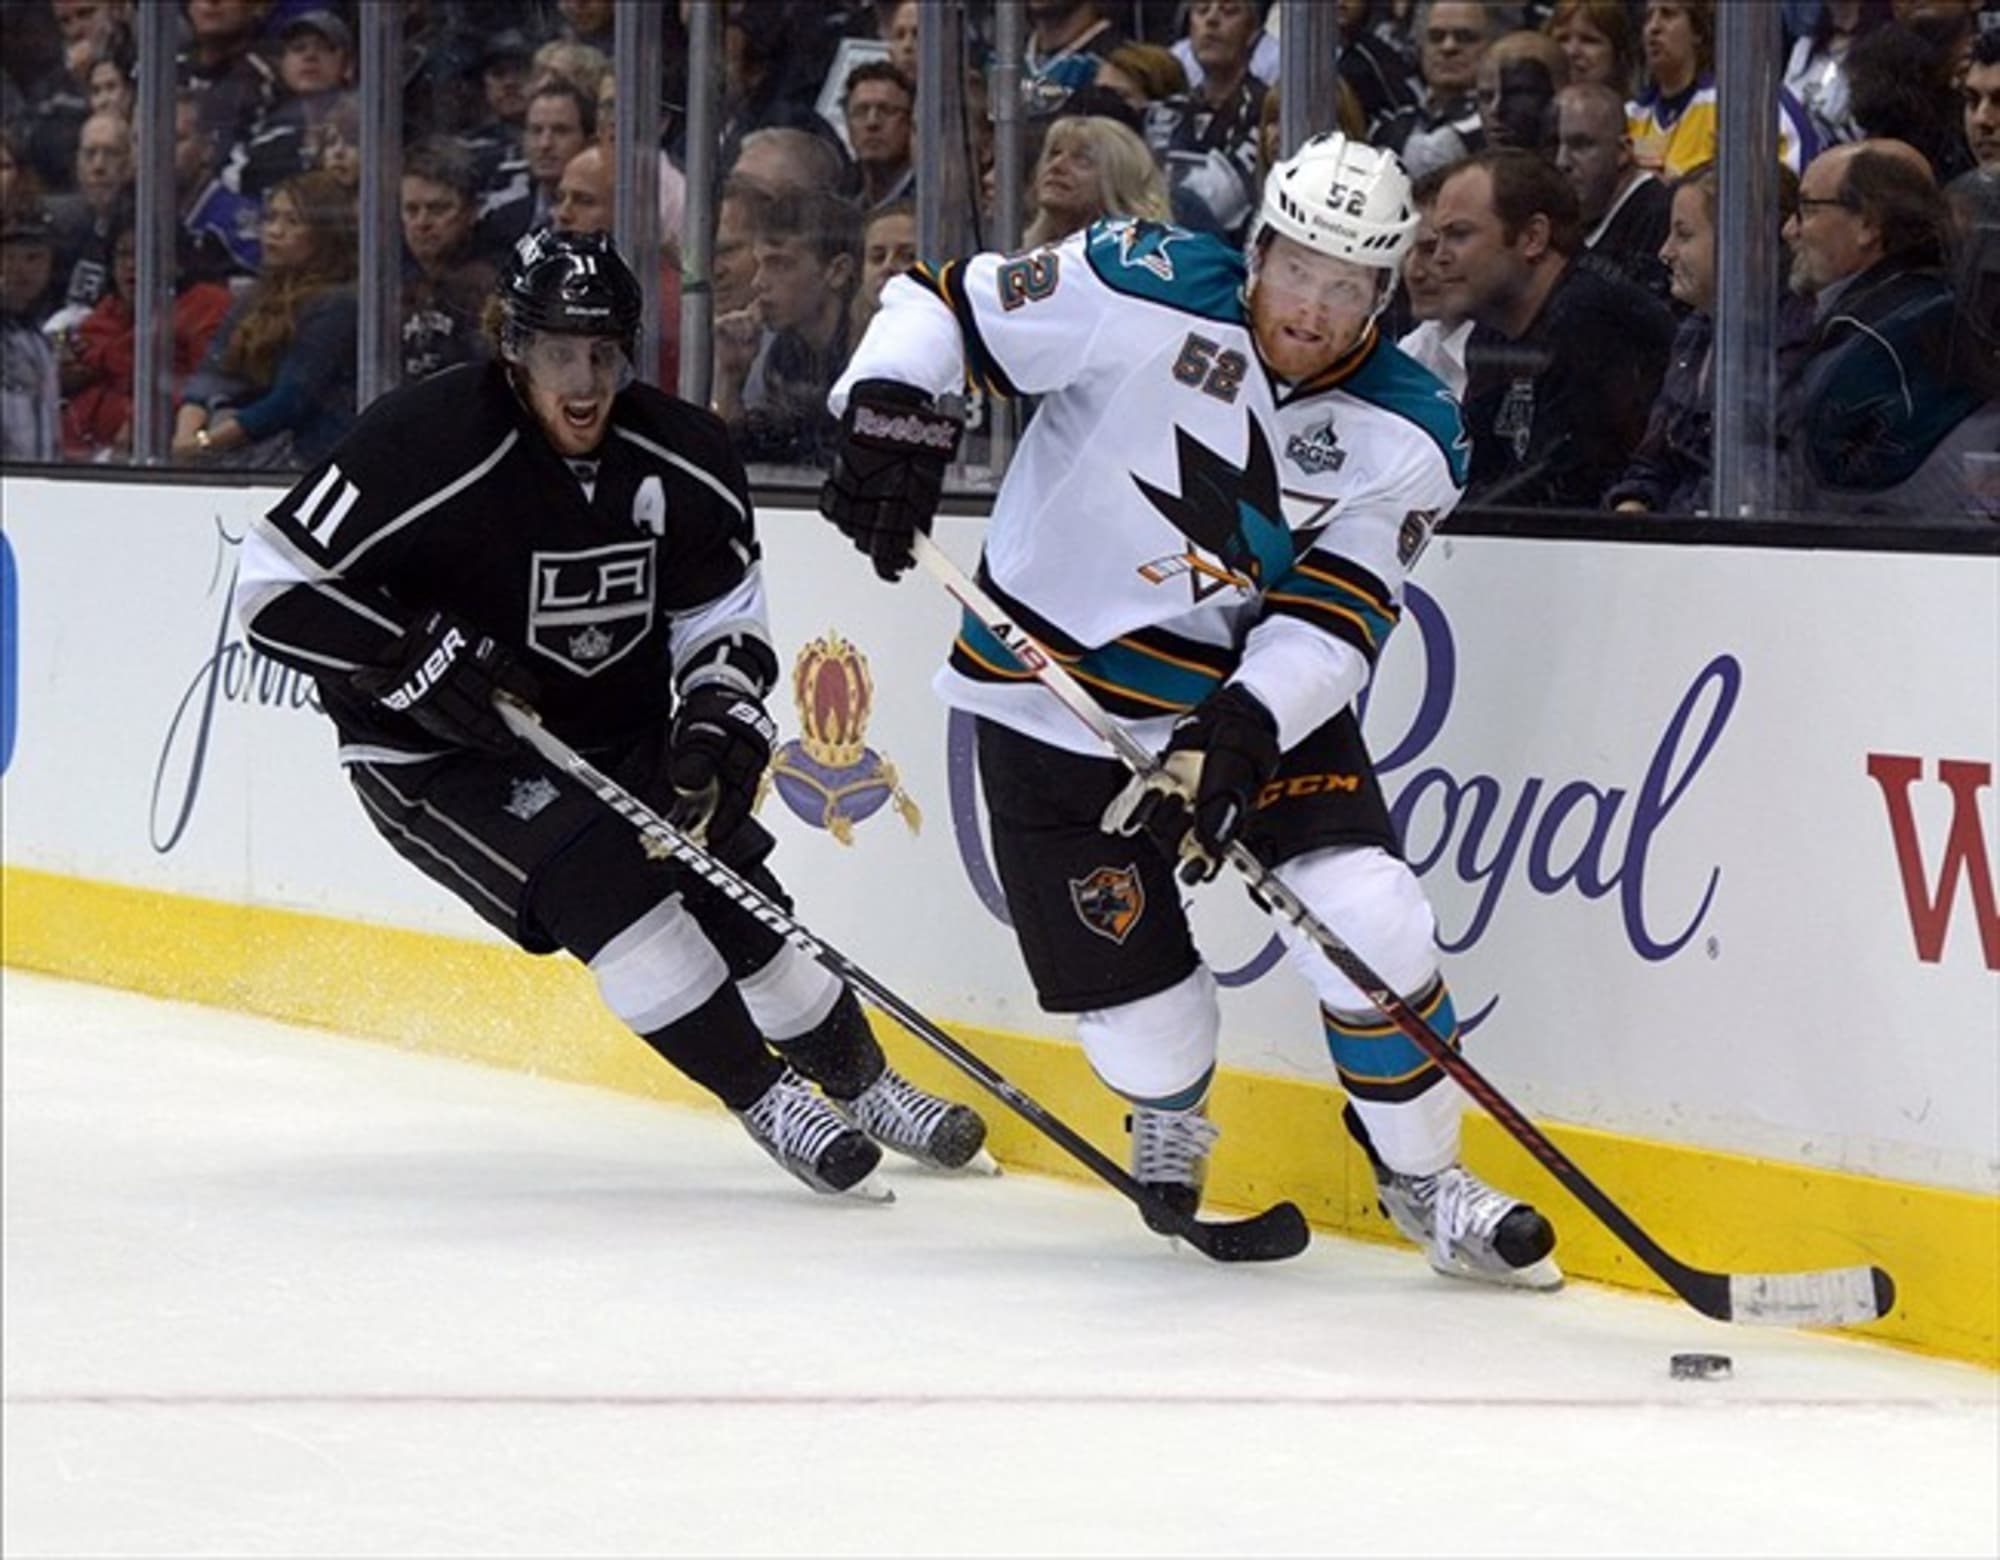 NHL Playoffs, Sharks vs. Kings Game 7: Start Time, TV Schedule, Live